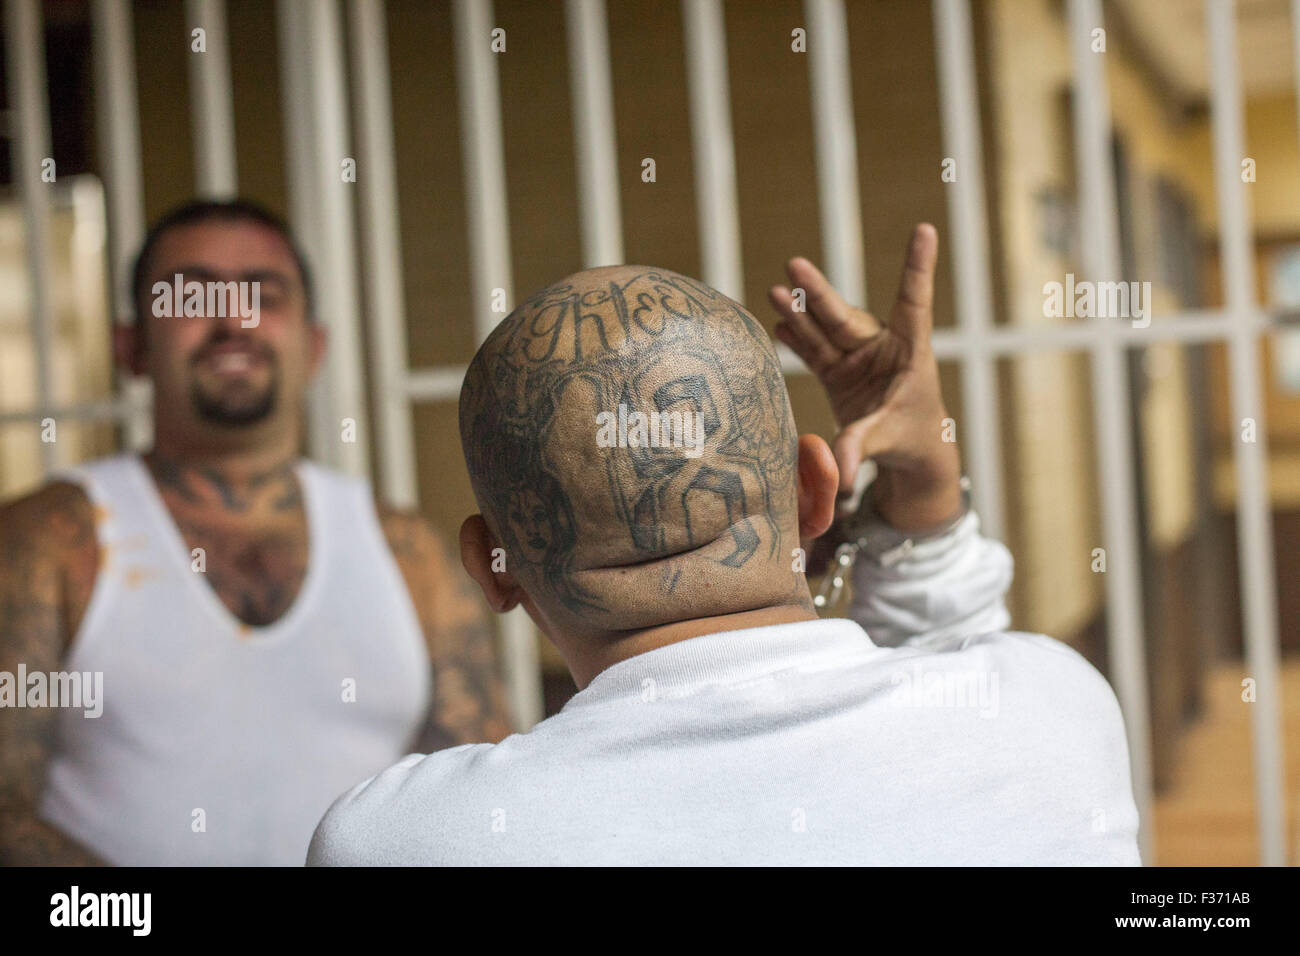 Guatemala City, Guatemala. 30th Sep, 2015. Gangsters keep under custody in the Tower of Courts, in Guatemala City, capital of Guatemala, Sept. 30, 2015. A gang member was killed and two others wounded by rival gangsters of Barrio 18 and Mara Salvatrucha while they were held under custody in the Tower of Courts basement, located in the Civic Center of the Guatemalan capital, according to local press information. Credit:  Luis Echeverria/Xinhua/Alamy Live News Stock Photo